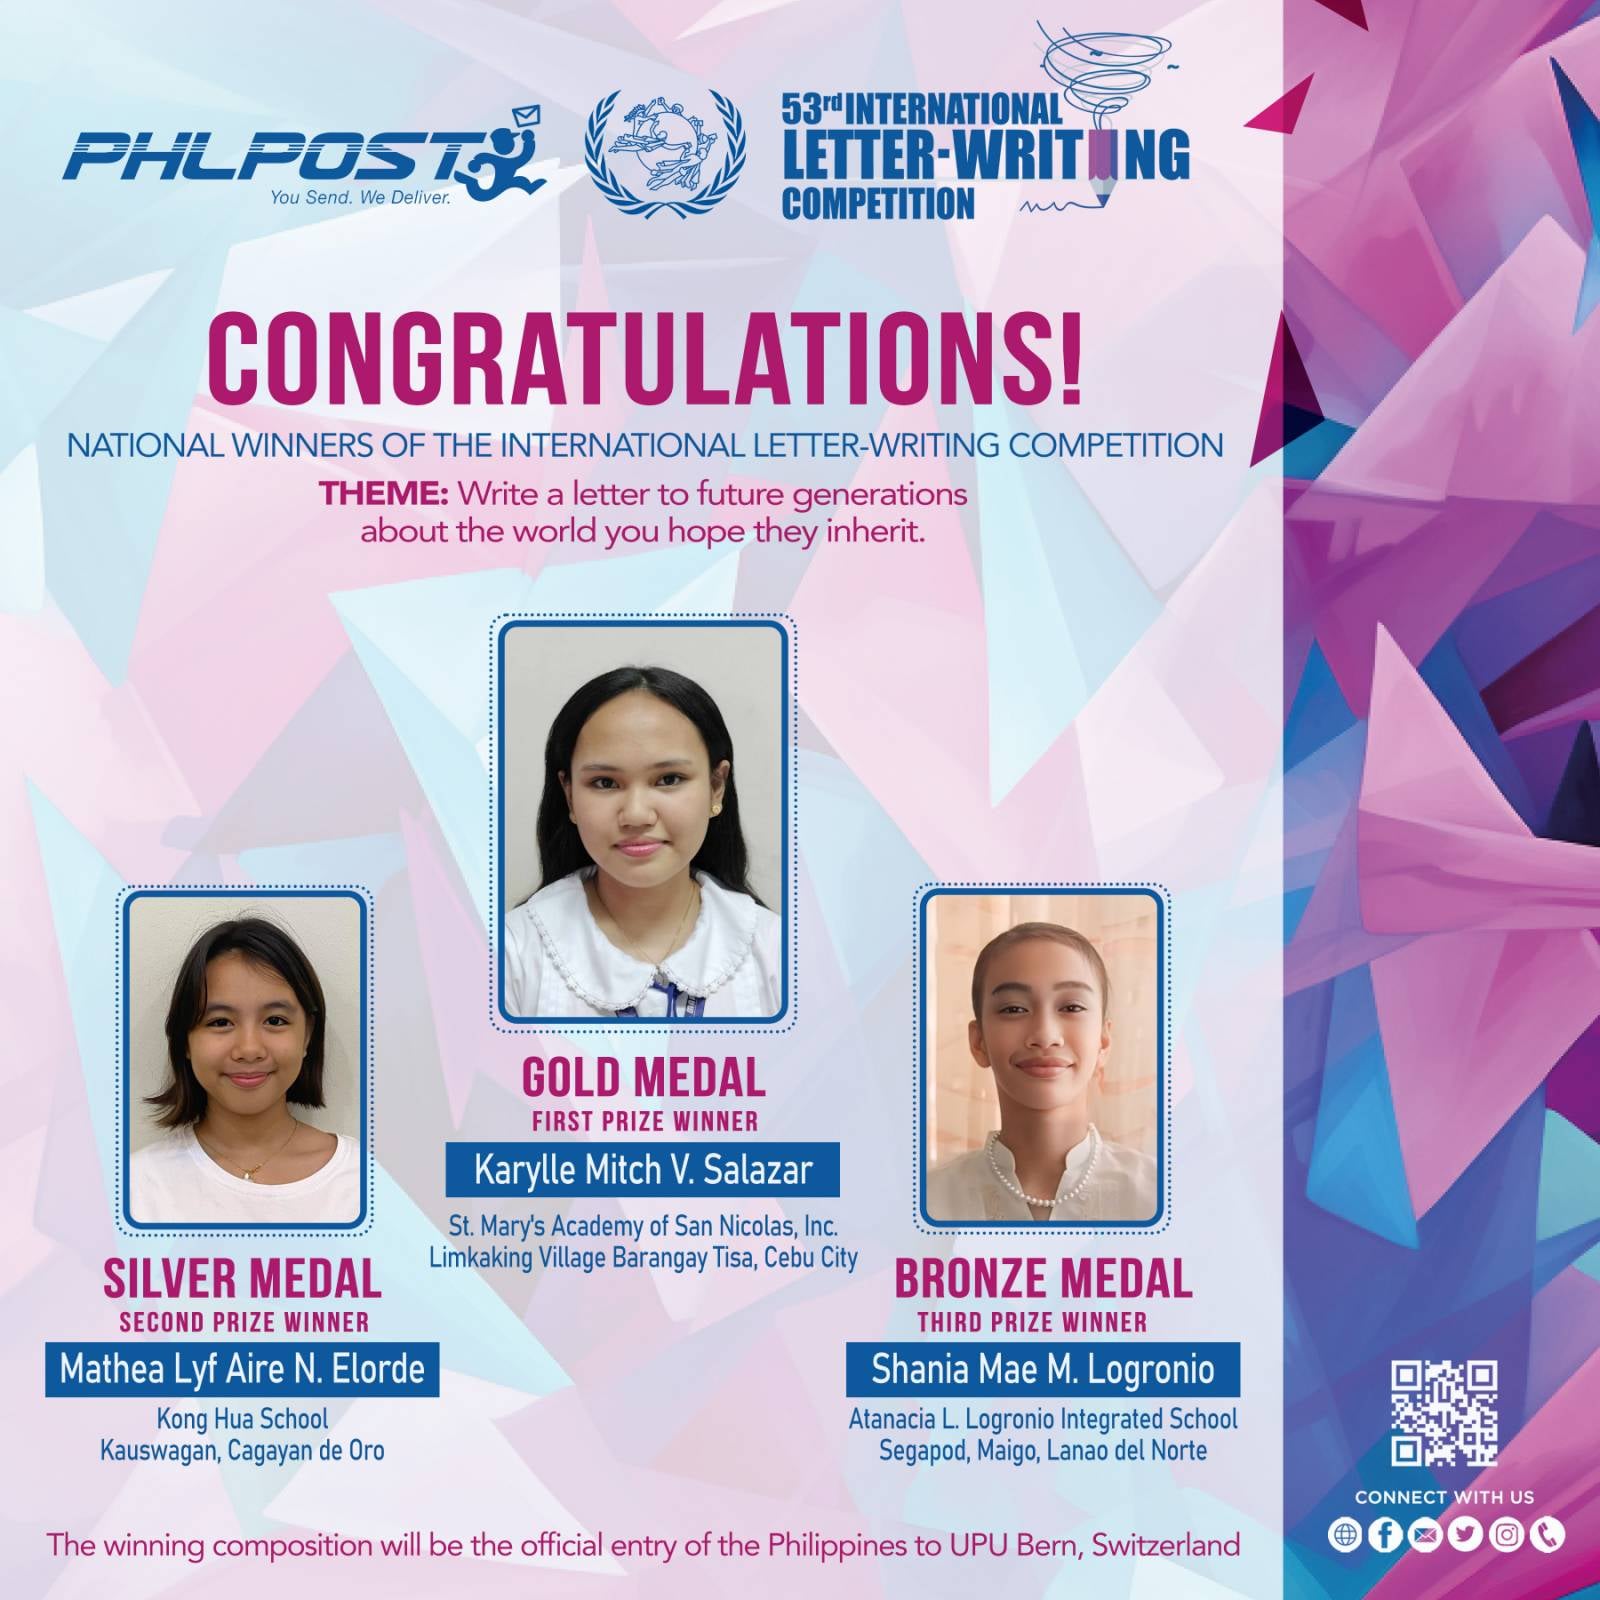 Congratulations to our National Winners of the International Letter-Writing Competition